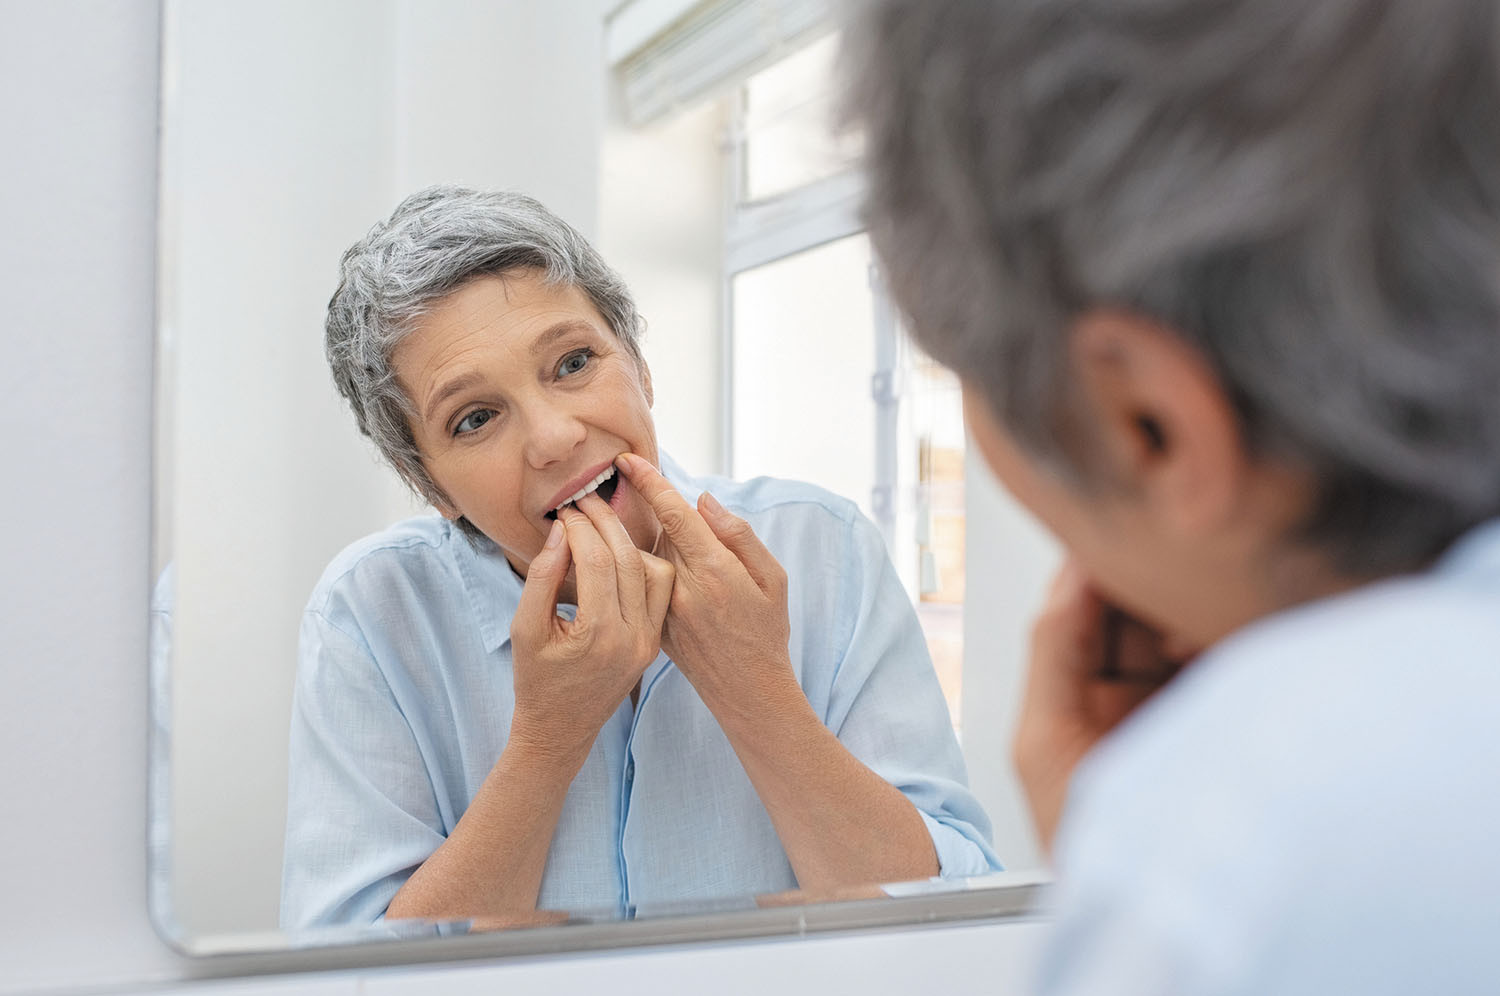 Gum disease linked to an increased risk for cancer